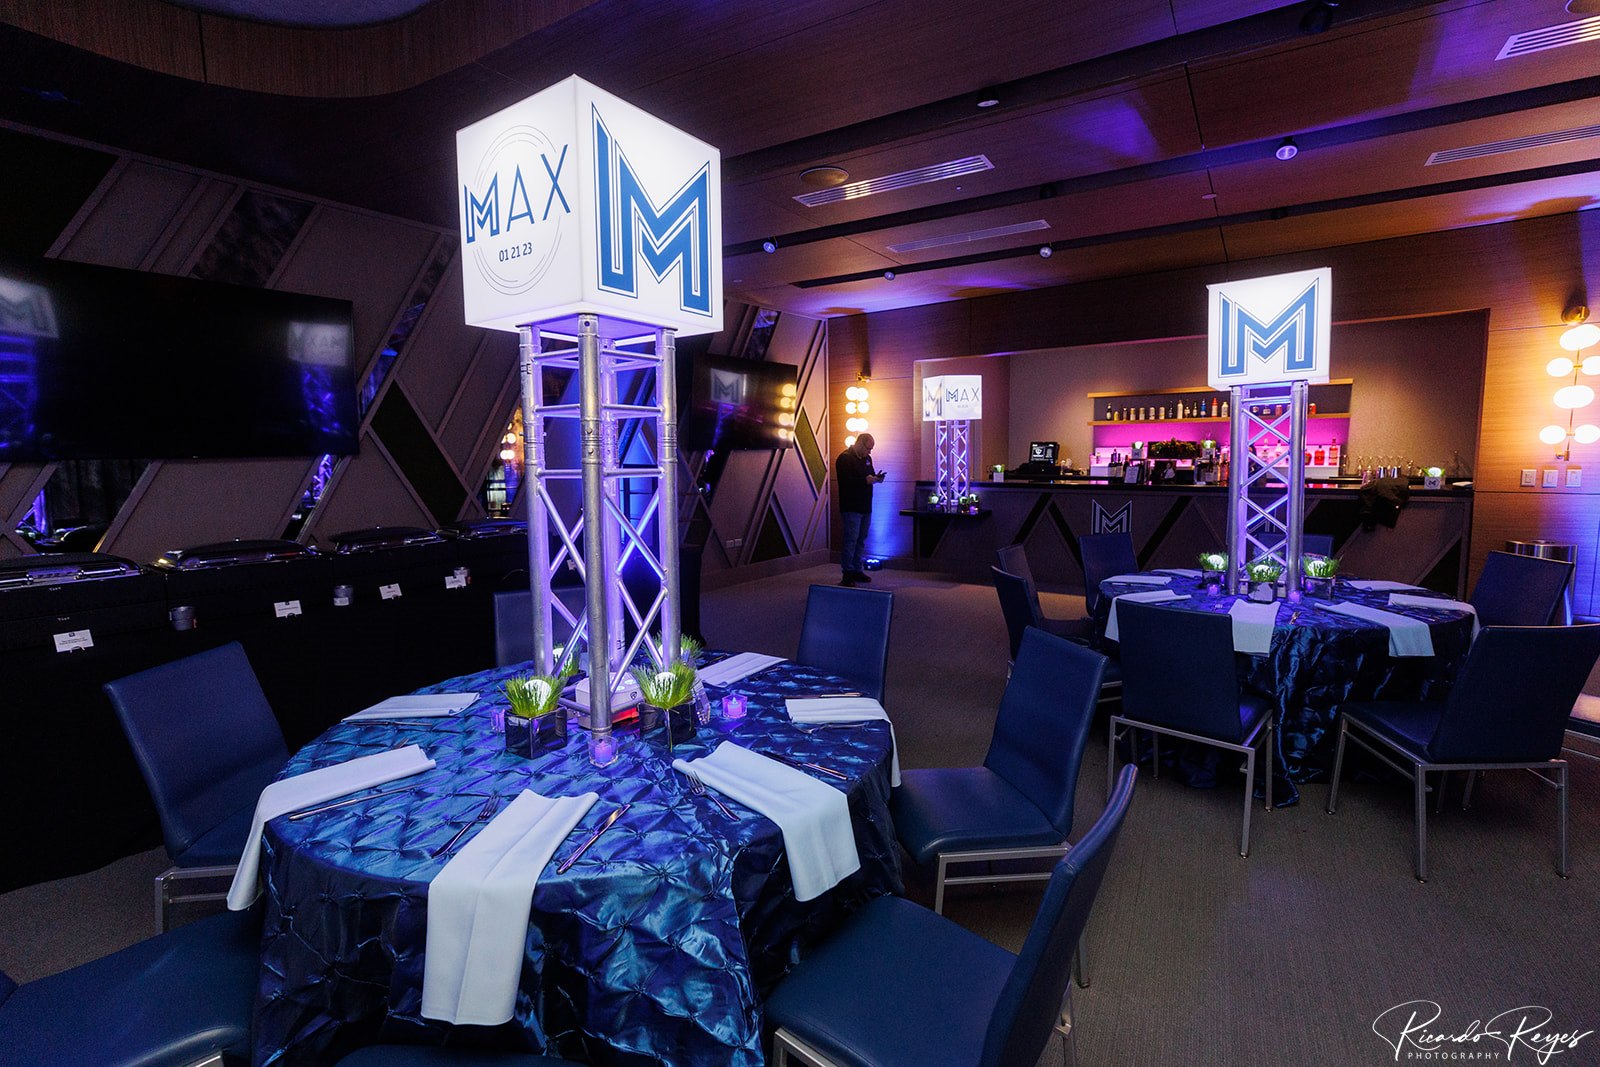 Max's reception with blue and white colors with his logo at Max's Sporty Bar Mitzvah Party at Top Golf in Germantown, MD | Pop Color Events | Adding a Pop of Color to Bar & Bat Mitzvahs in DC, MD & VA | Photo by: Ricardo Reyes